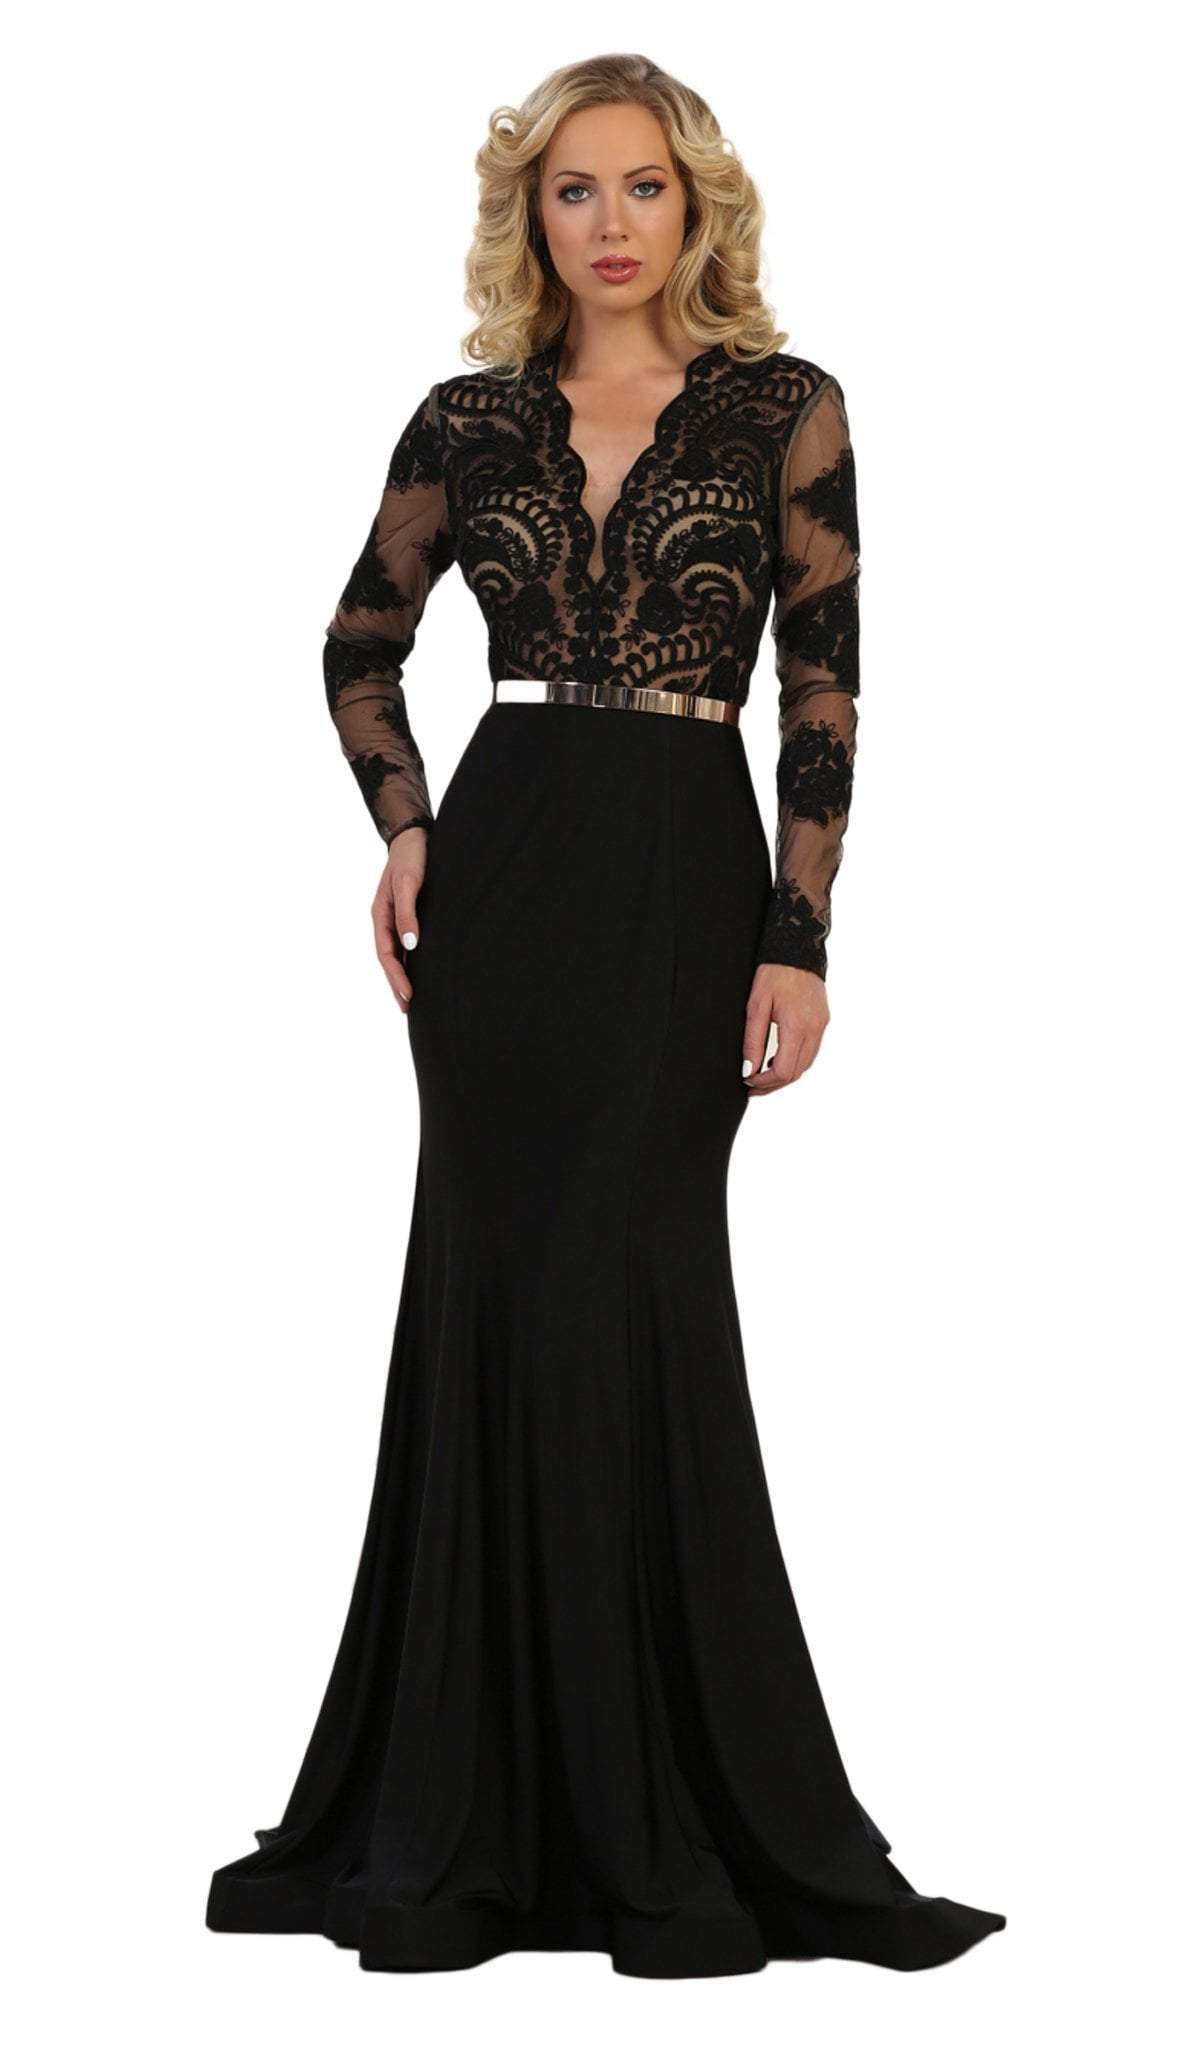 May Queen - Lace Bodice Scalloped V-Neck Trumpet Dress RQ7624 In Black